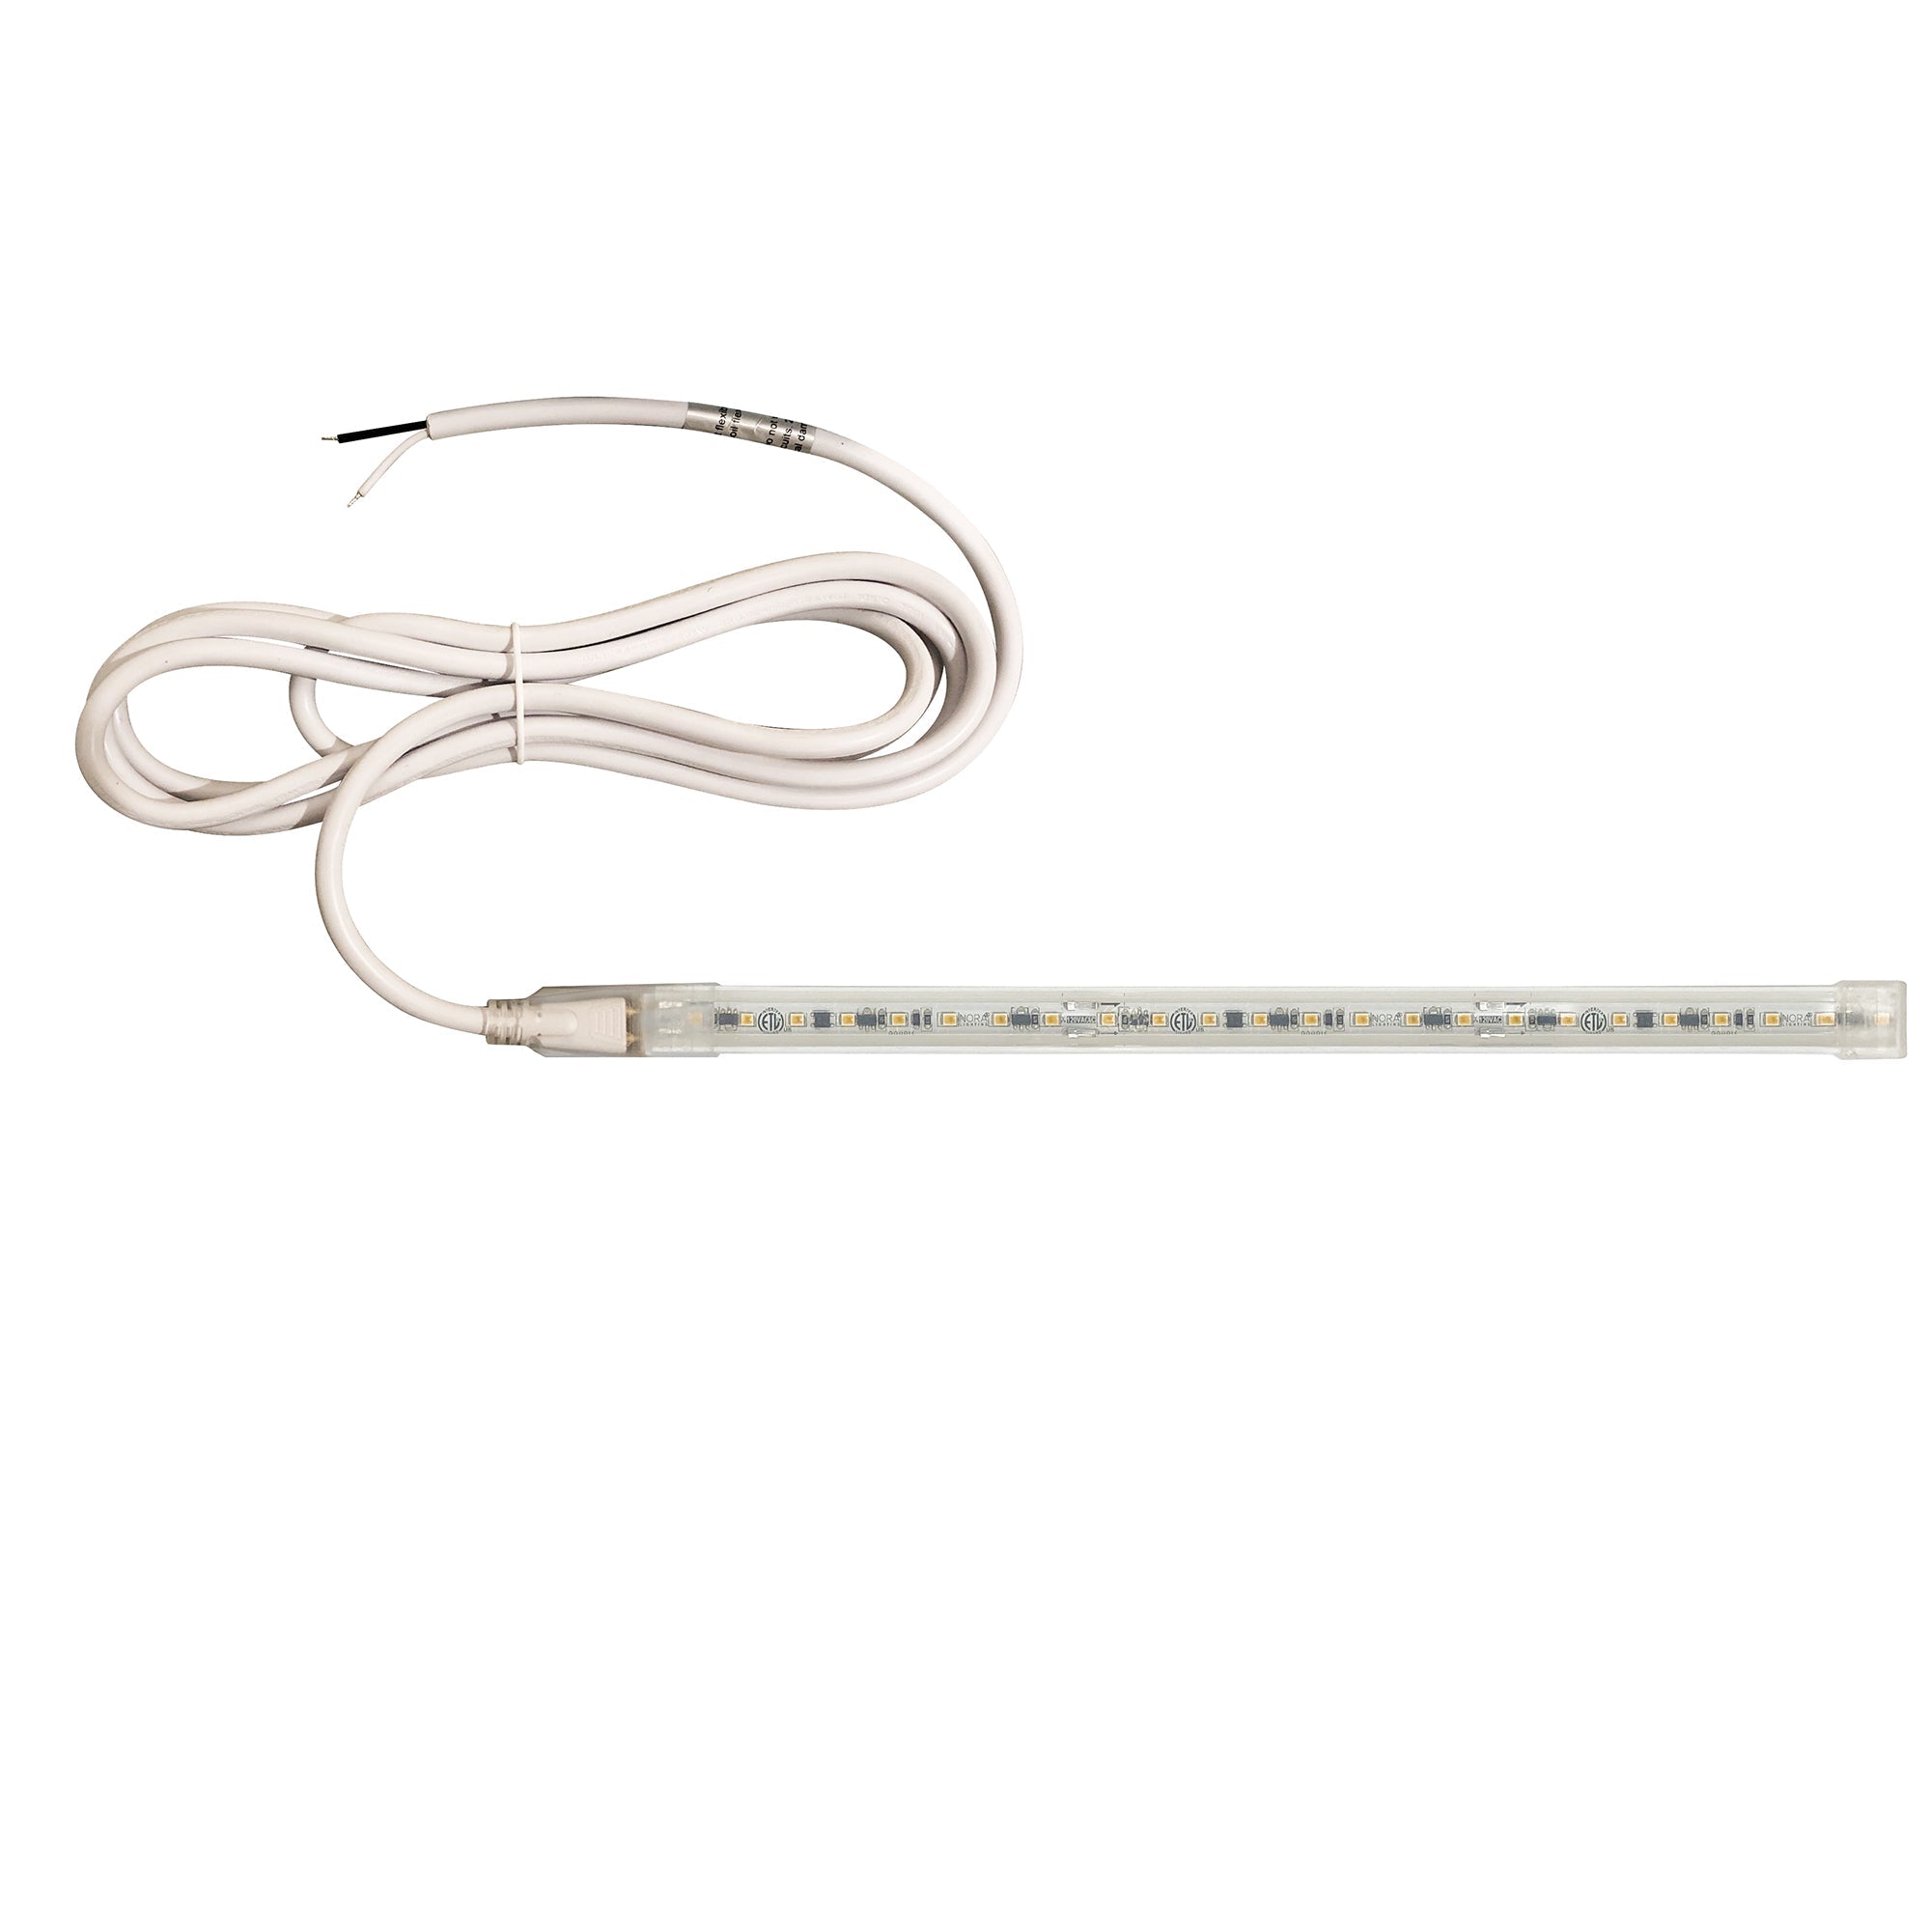 Nora Lighting NUTP13-W102-12-930/HW - Accent / Undercabinet - Custom Cut 102-ft 120V Continuous LED Tape Light, 330lm / 3.6W per foot, 3000K, w/ Mounting Clips and 8' Hardwired Power Cord